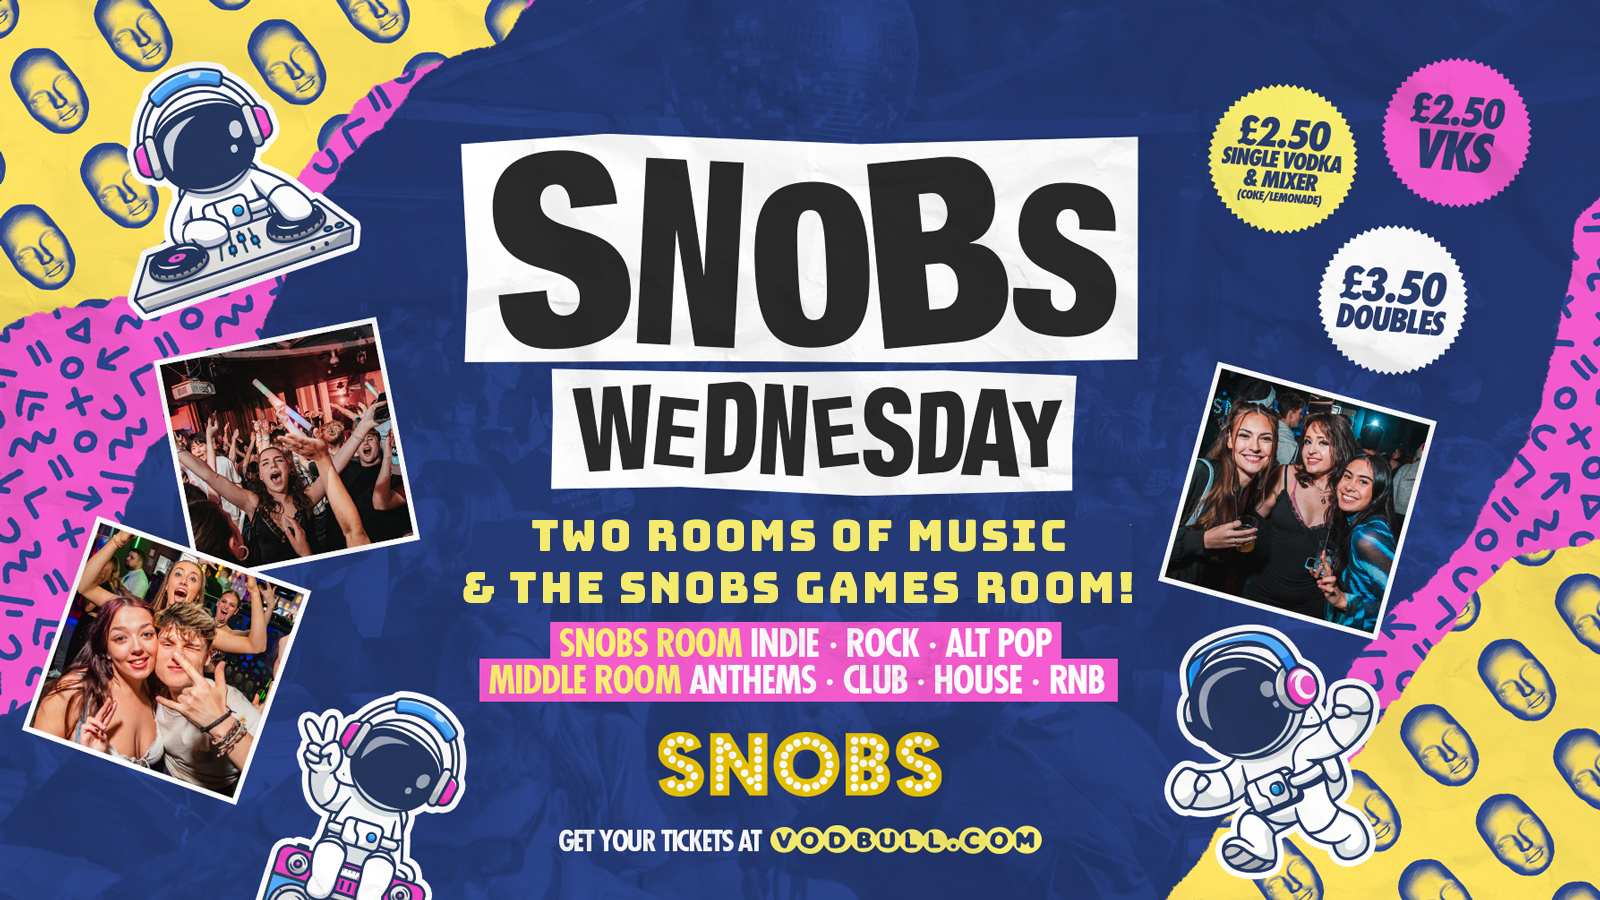 Snobs Wednesday : [TONIGHT] Feat. TWO rooms of Music & Games Room! 21st Feb